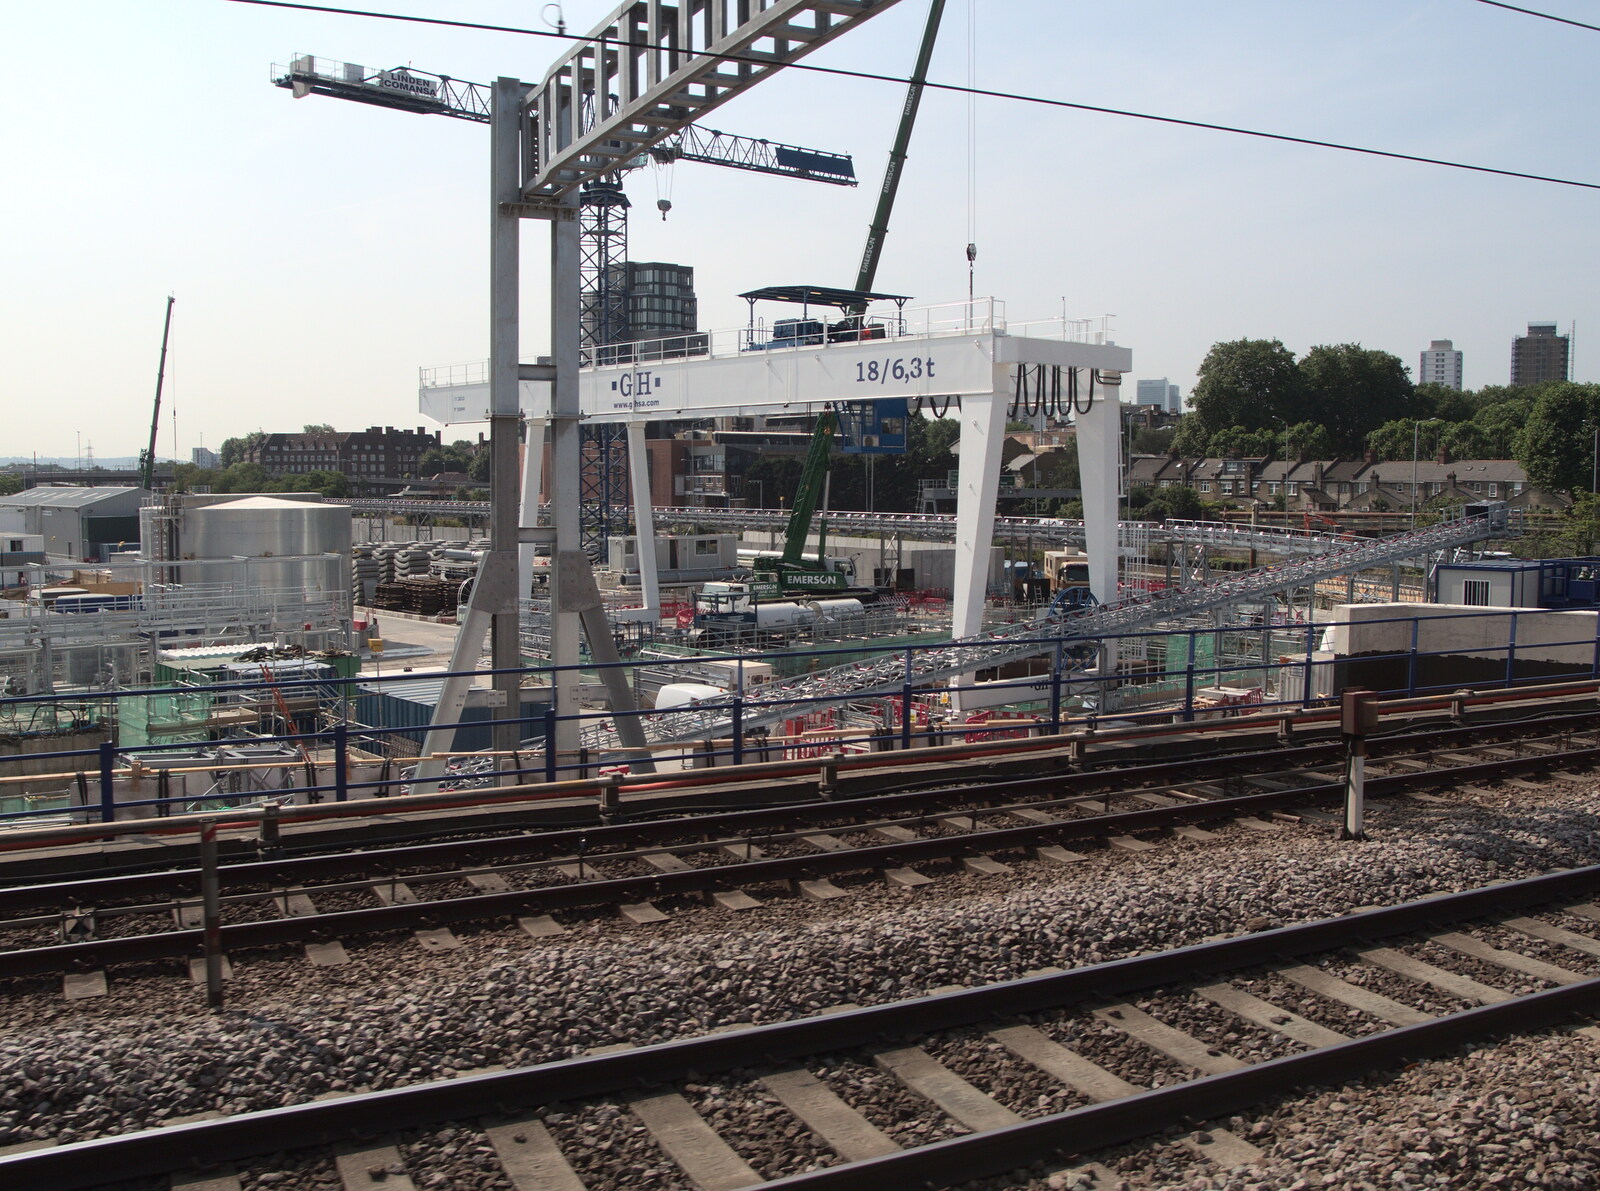 The big crane thing at Crossrail from The Demolition of the Garage, Brome, Suffolk - 17th July 2013